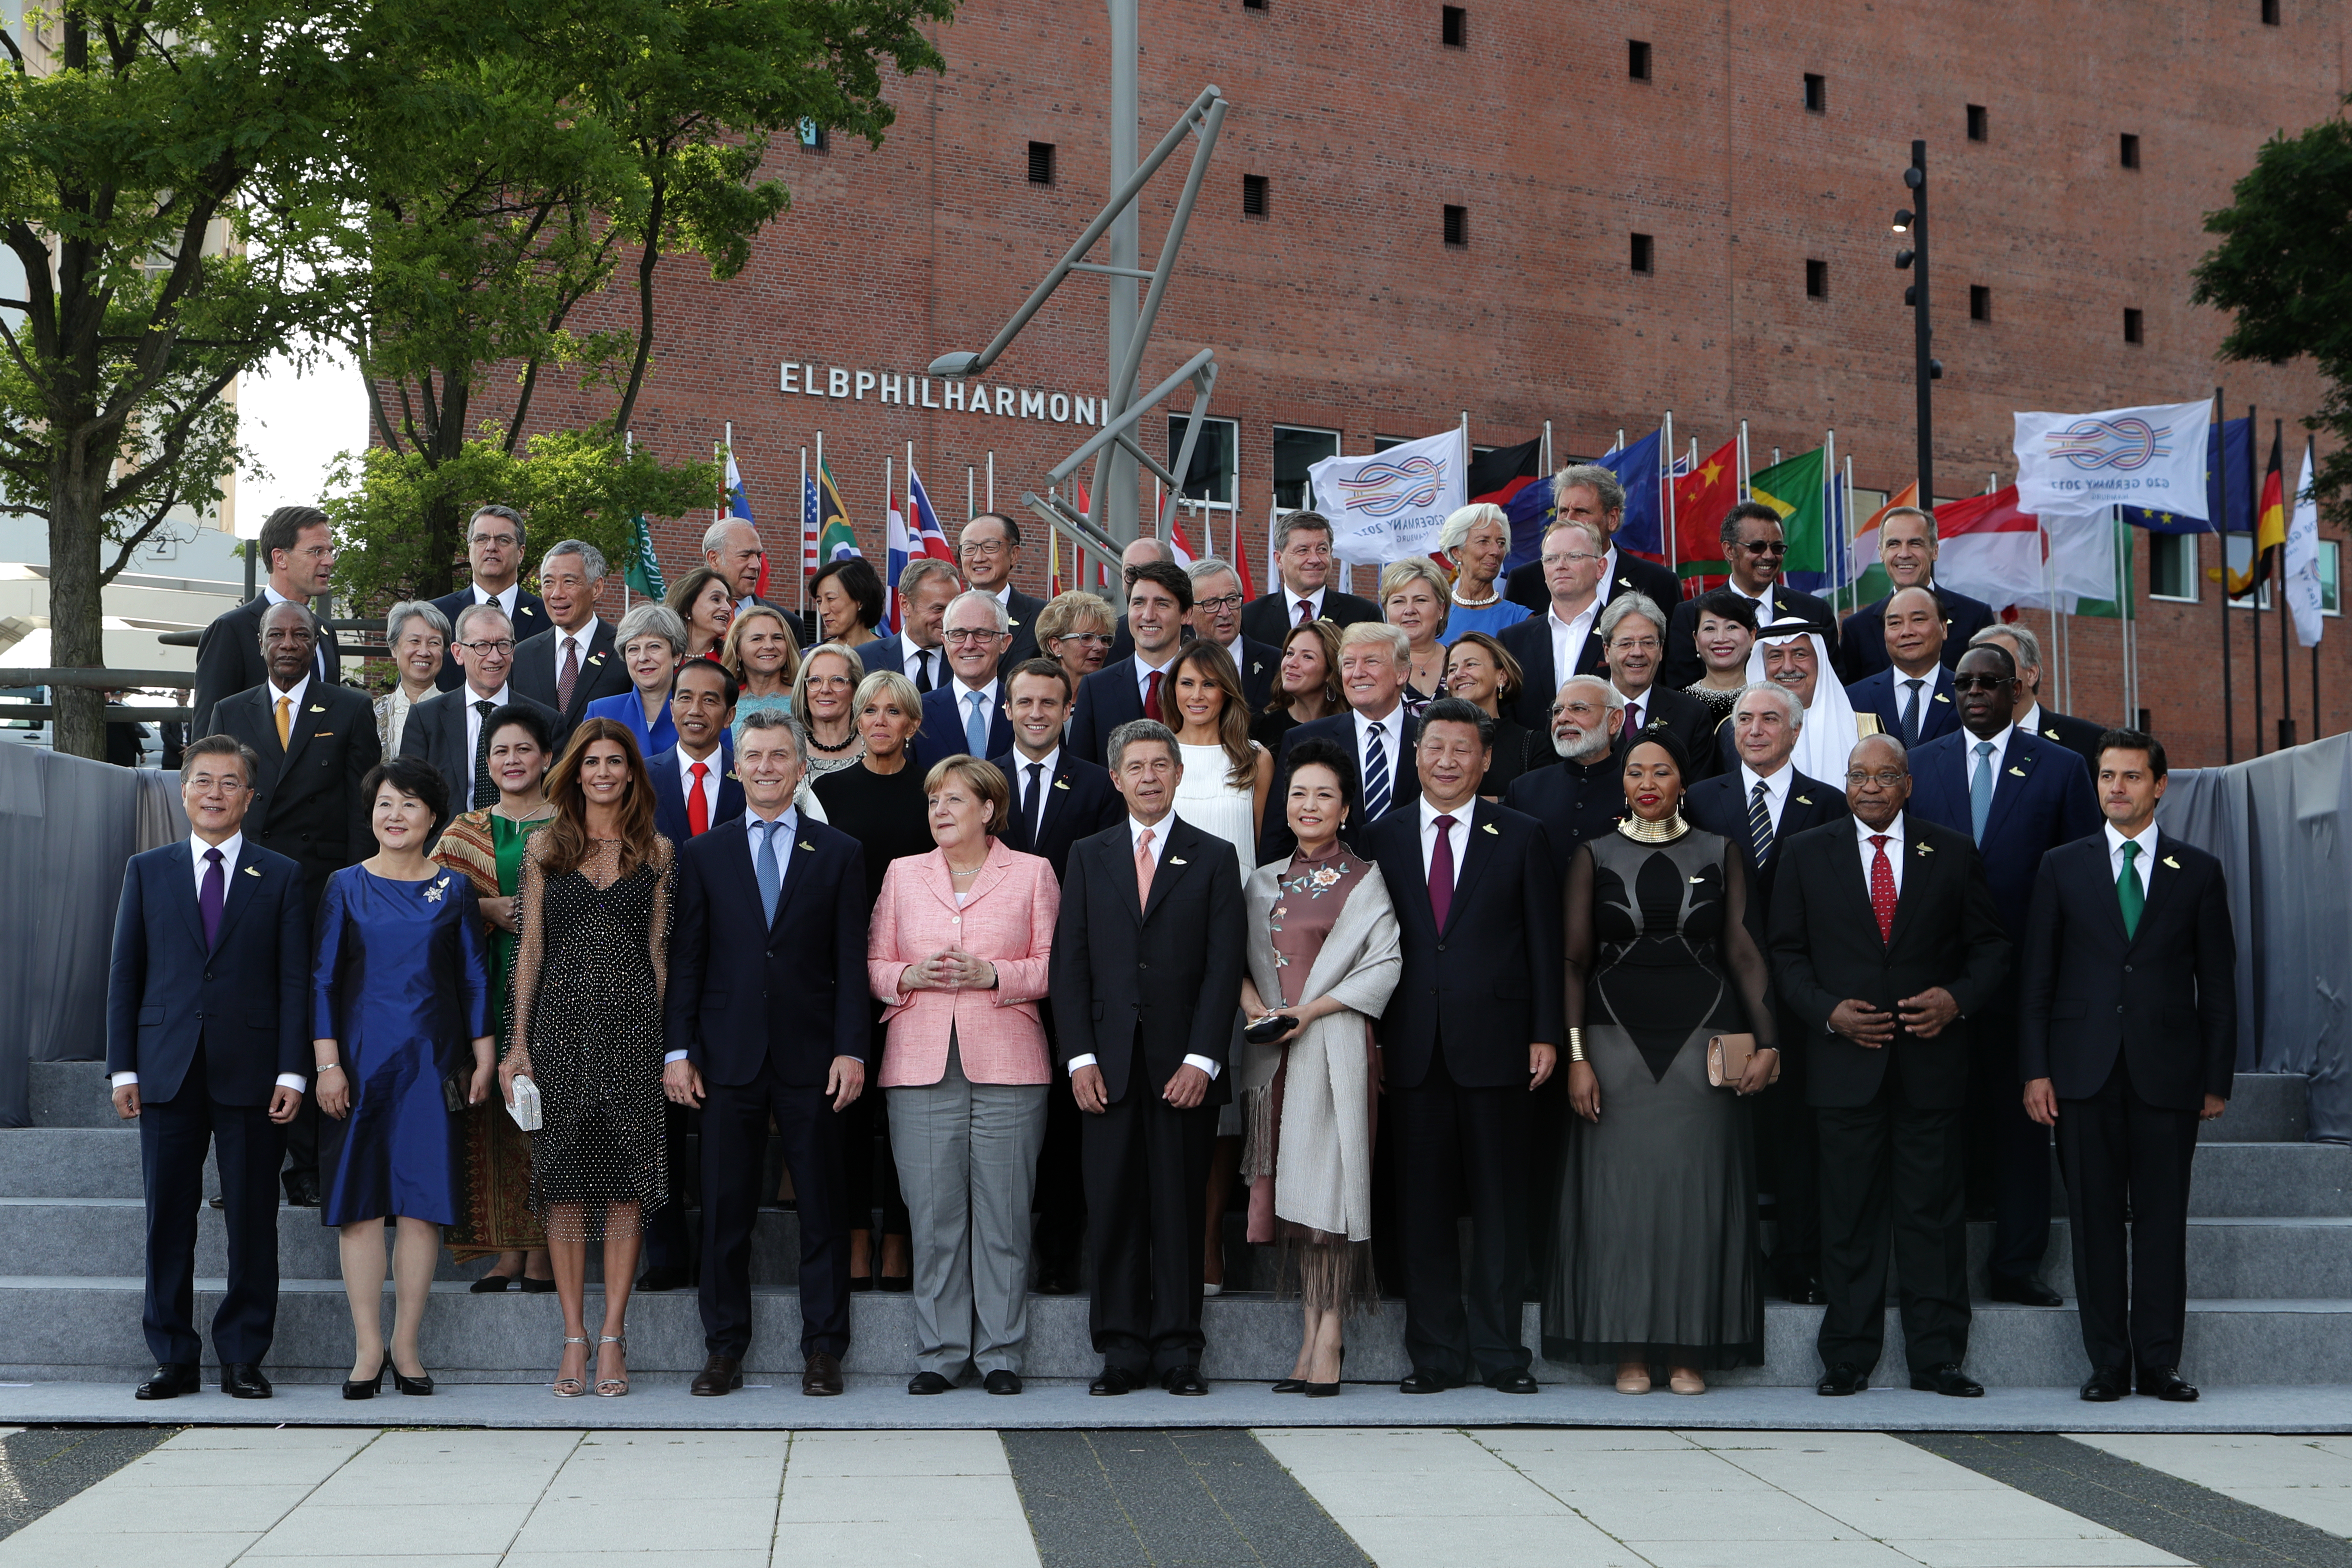 PM Lee at G20 summit in Hamburg on 7 to 8 July 2-17 (MCI Photo by Kenji Soon)